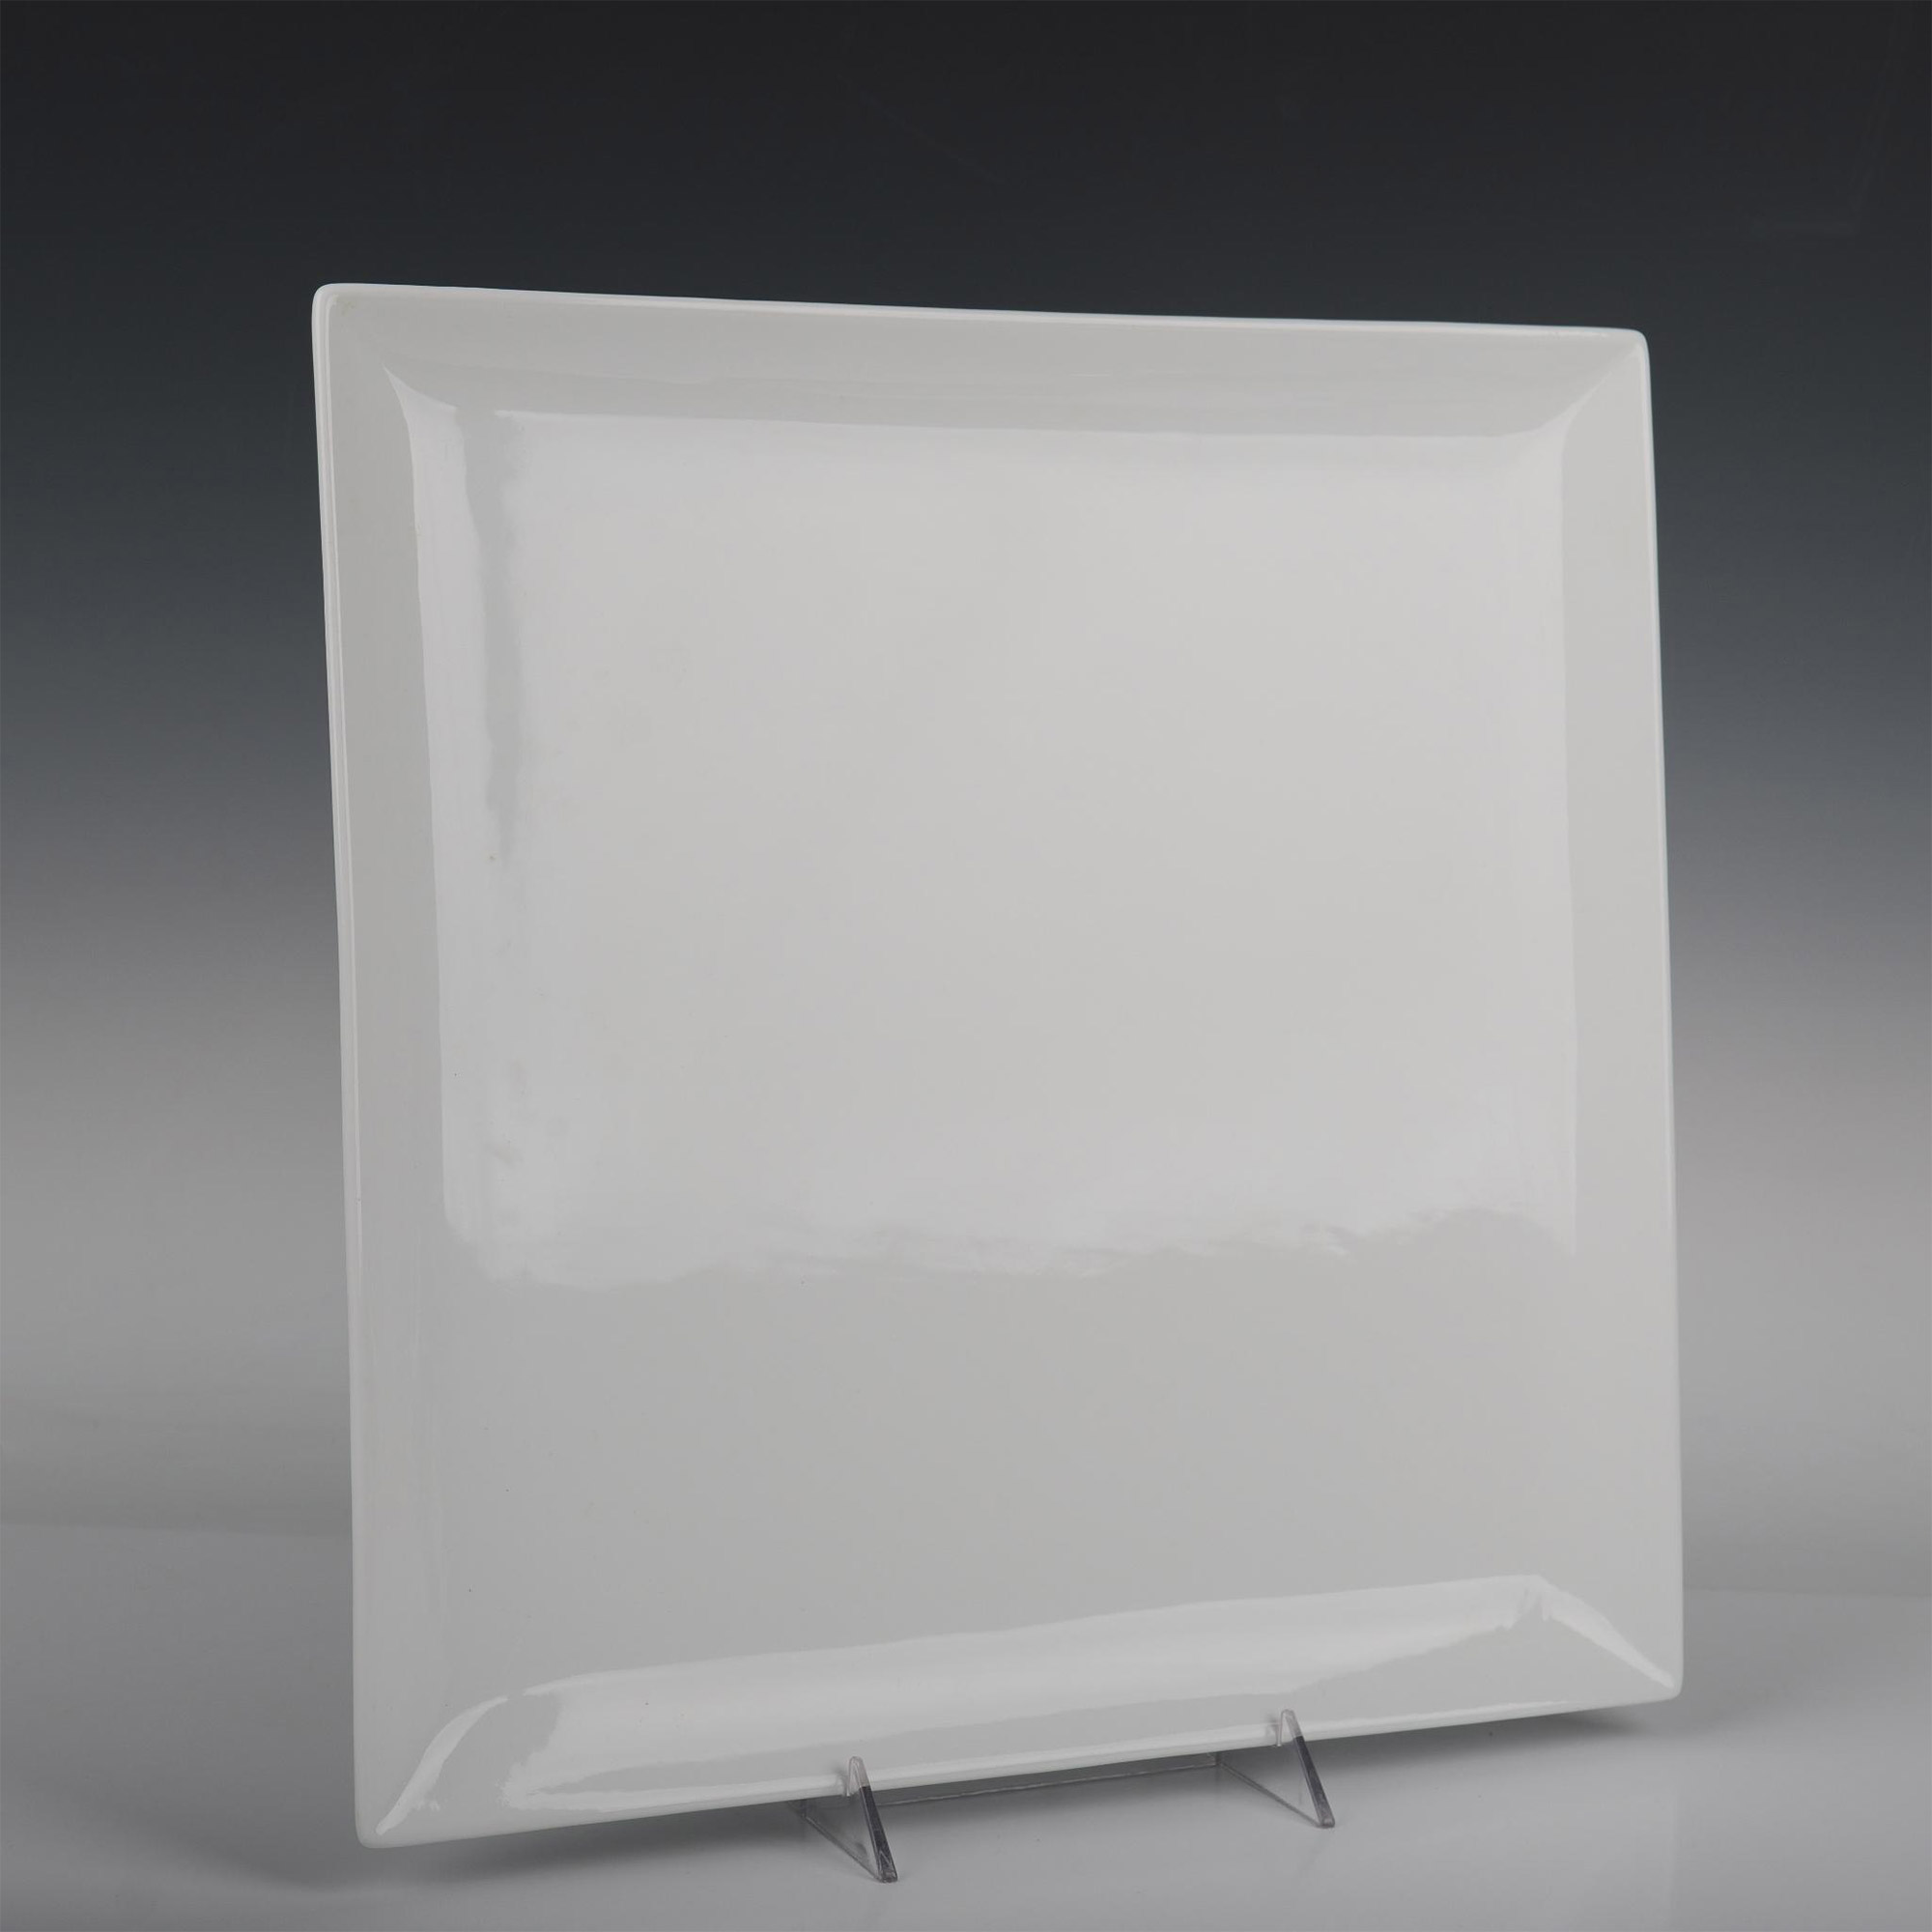 4pc Front of the House White Porcelain Square Platter, Mod - Image 2 of 4